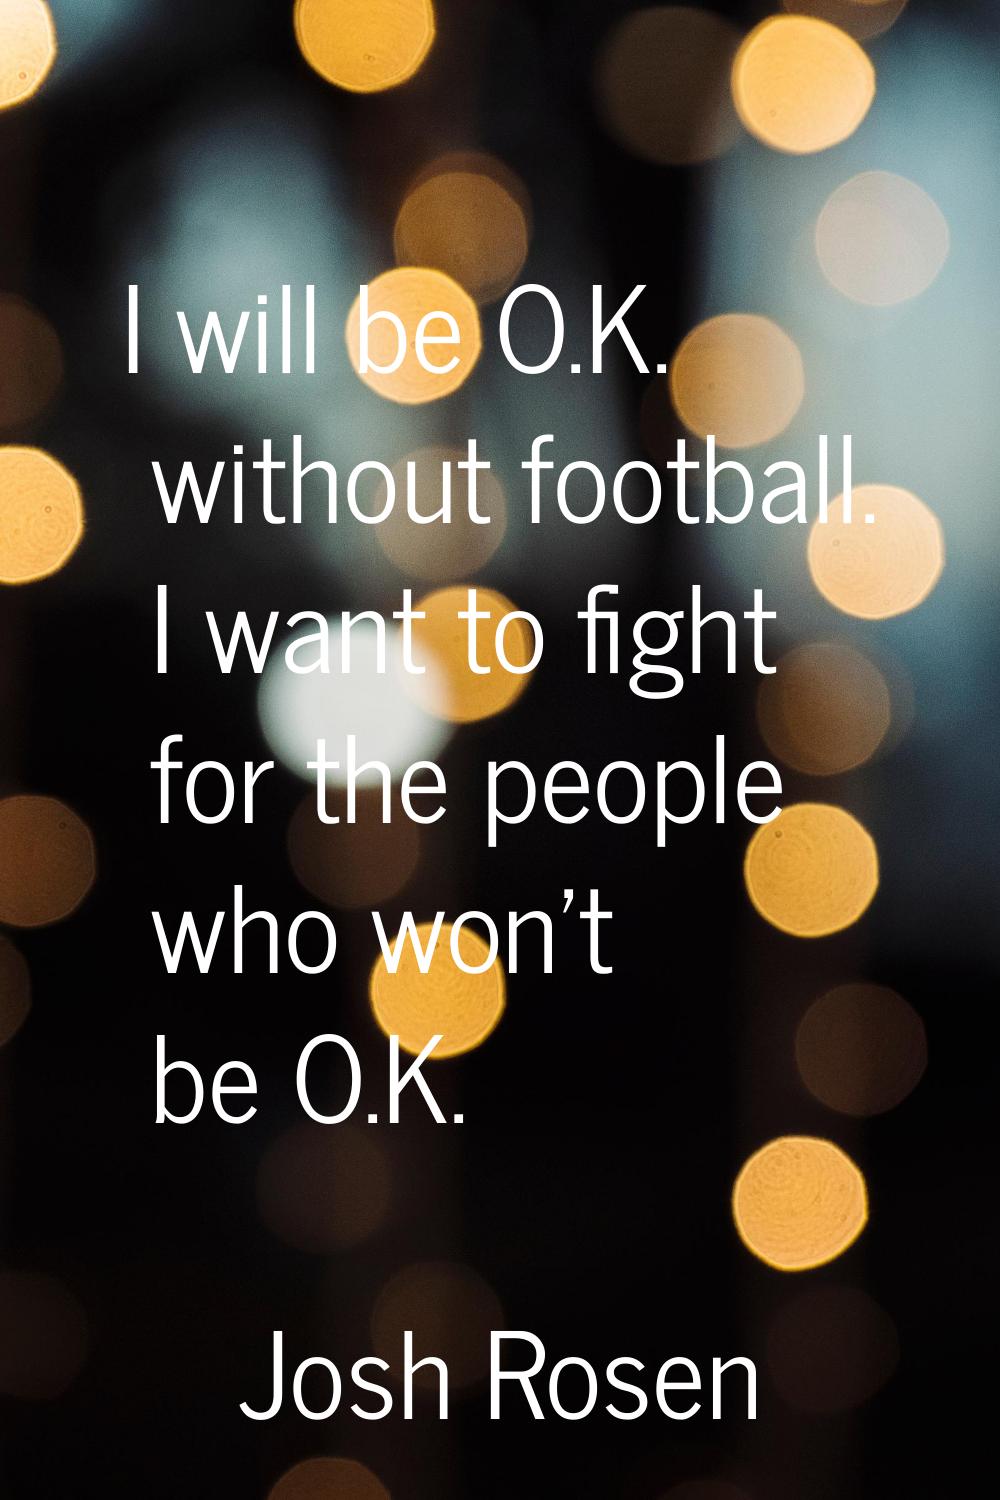 I will be O.K. without football. I want to fight for the people who won't be O.K.